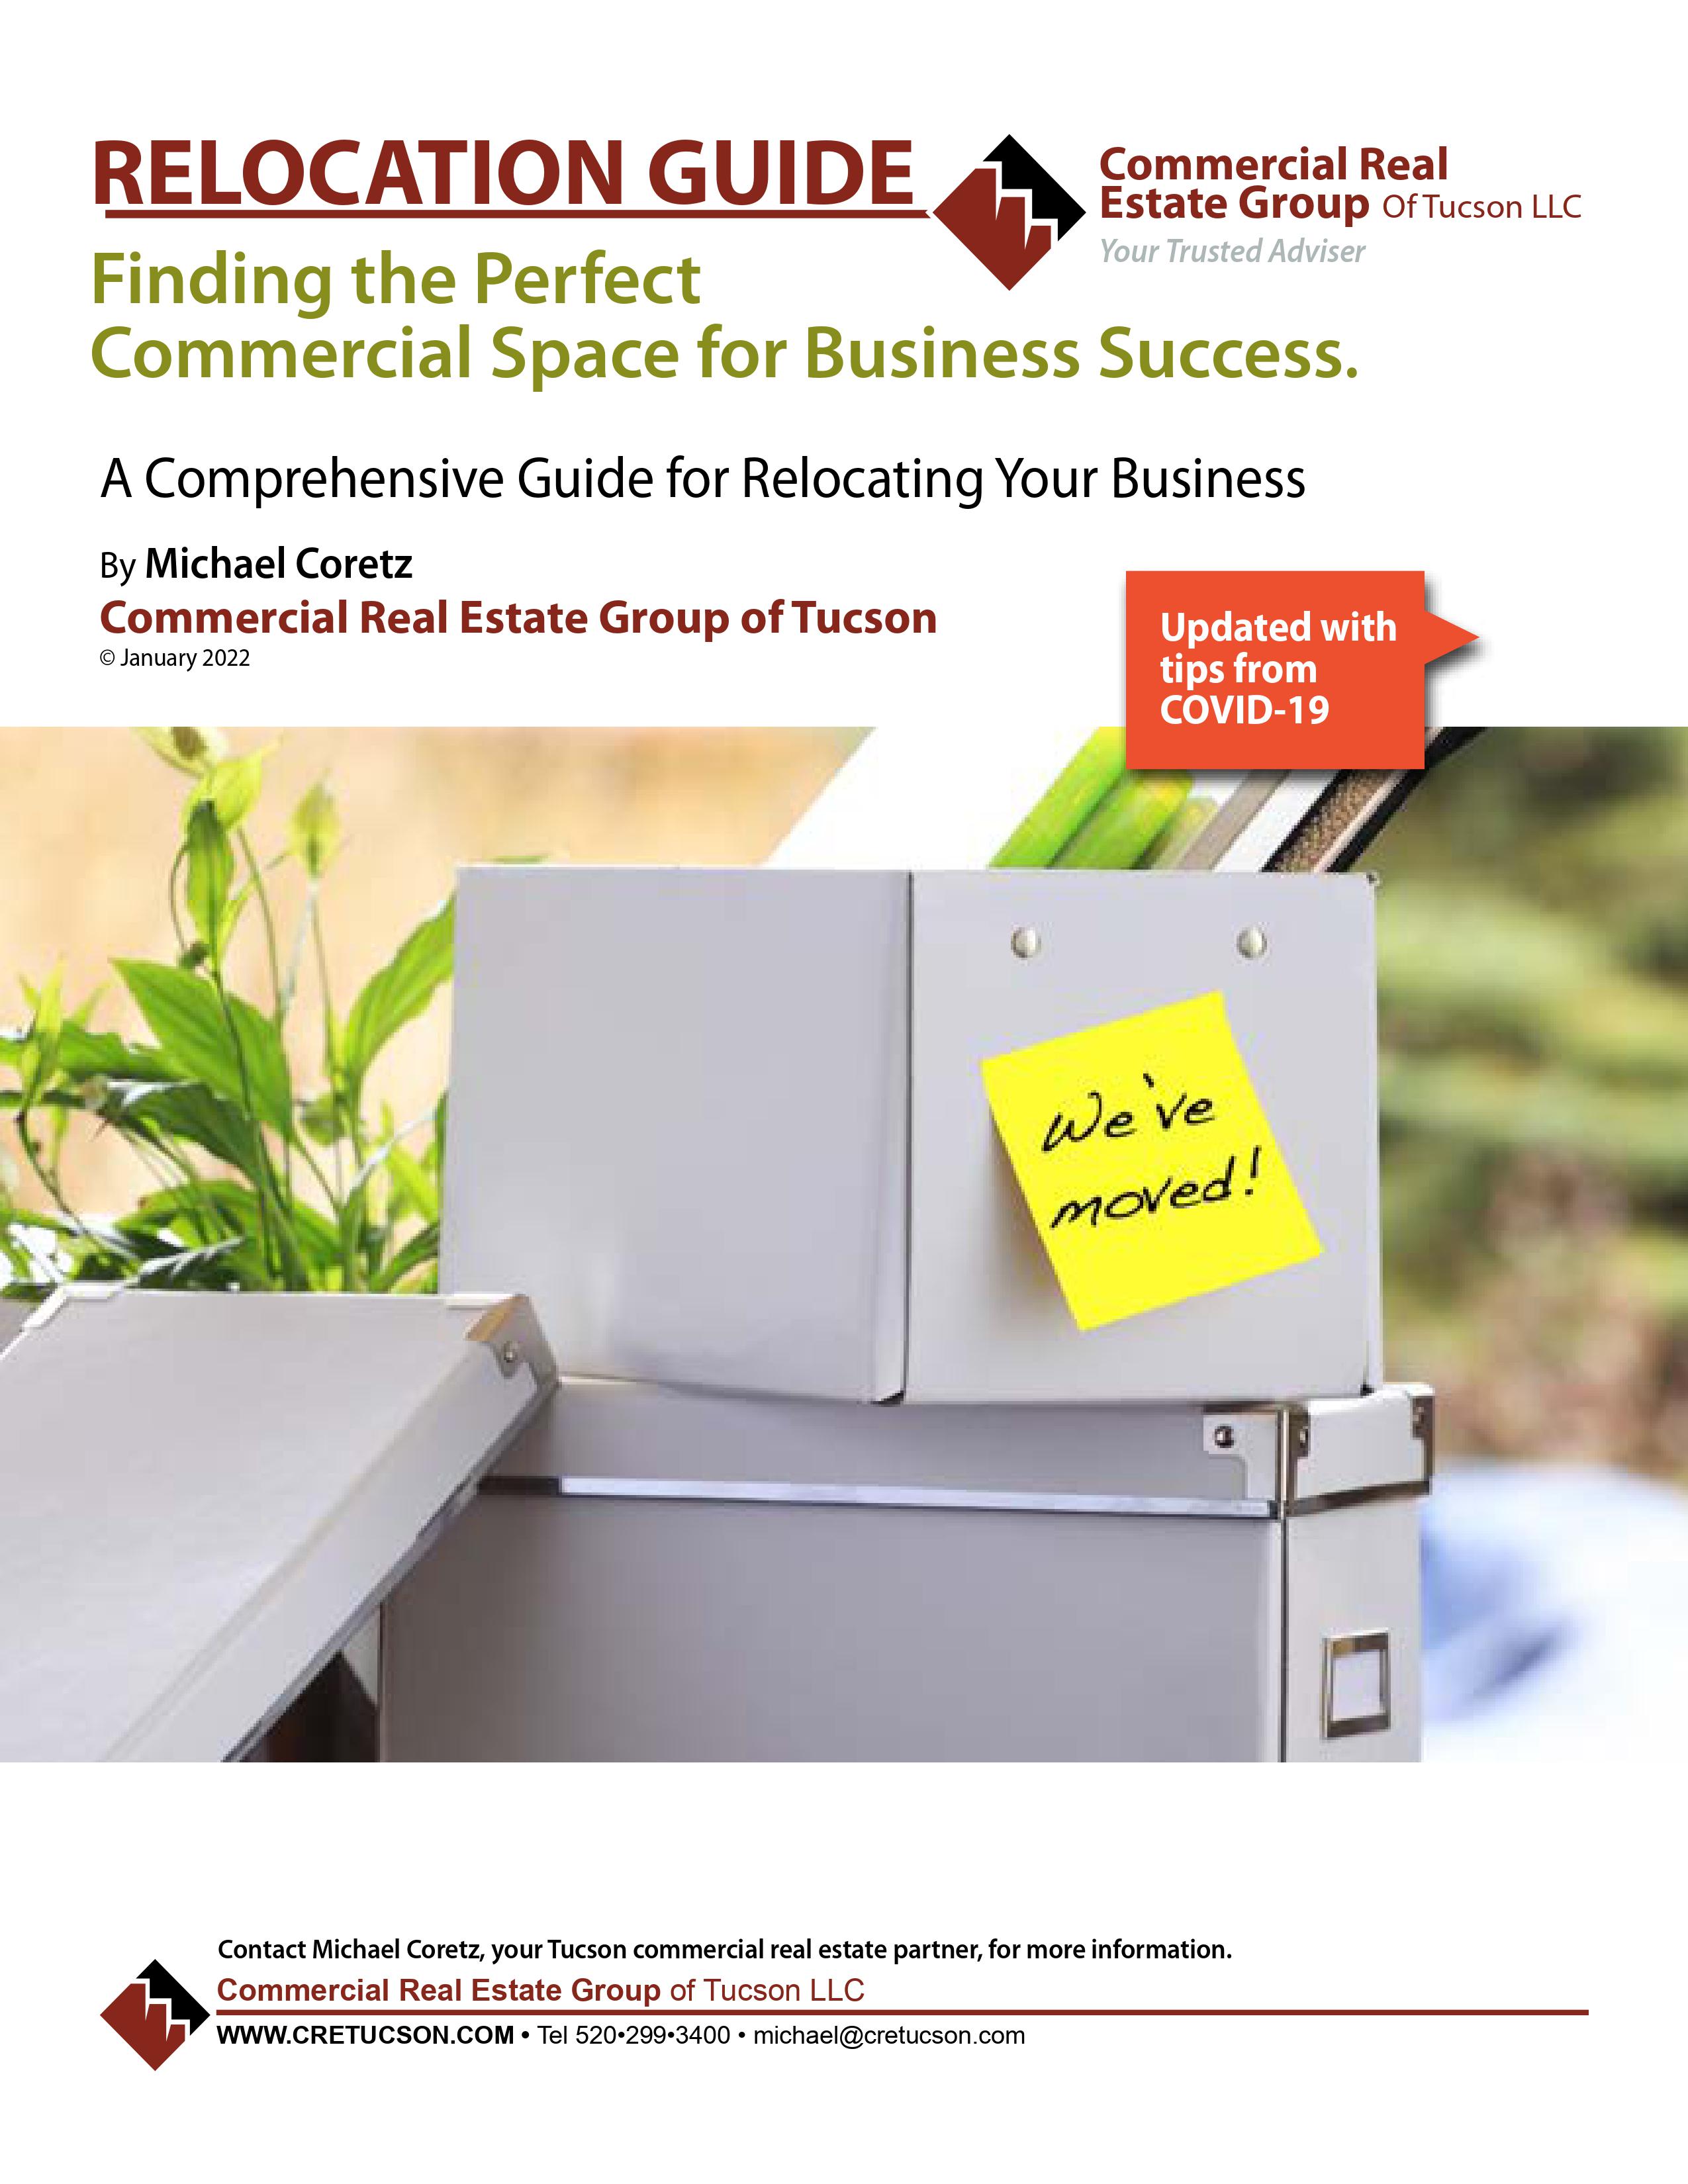 Relocation Guide—Finding the Perfect Commercial Space for Business Success